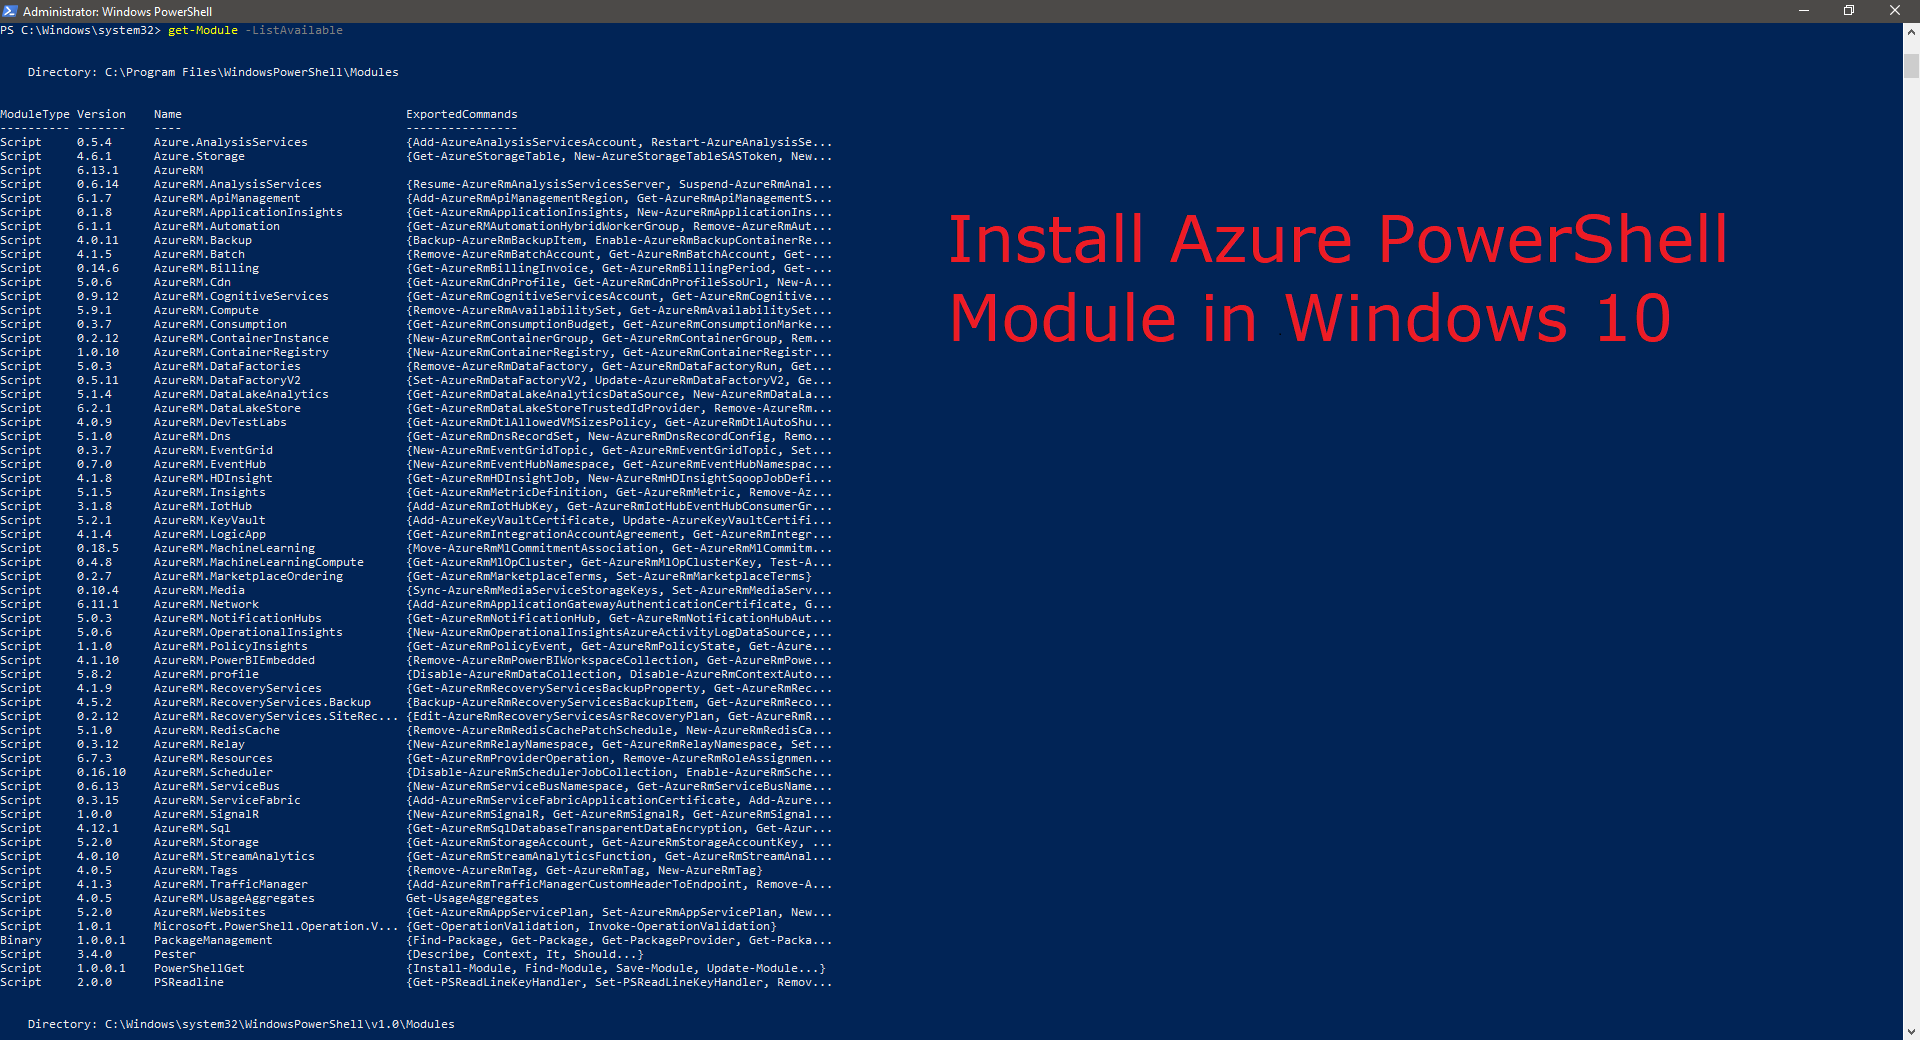 How to install Azure PowerShell Module in Windows 10?